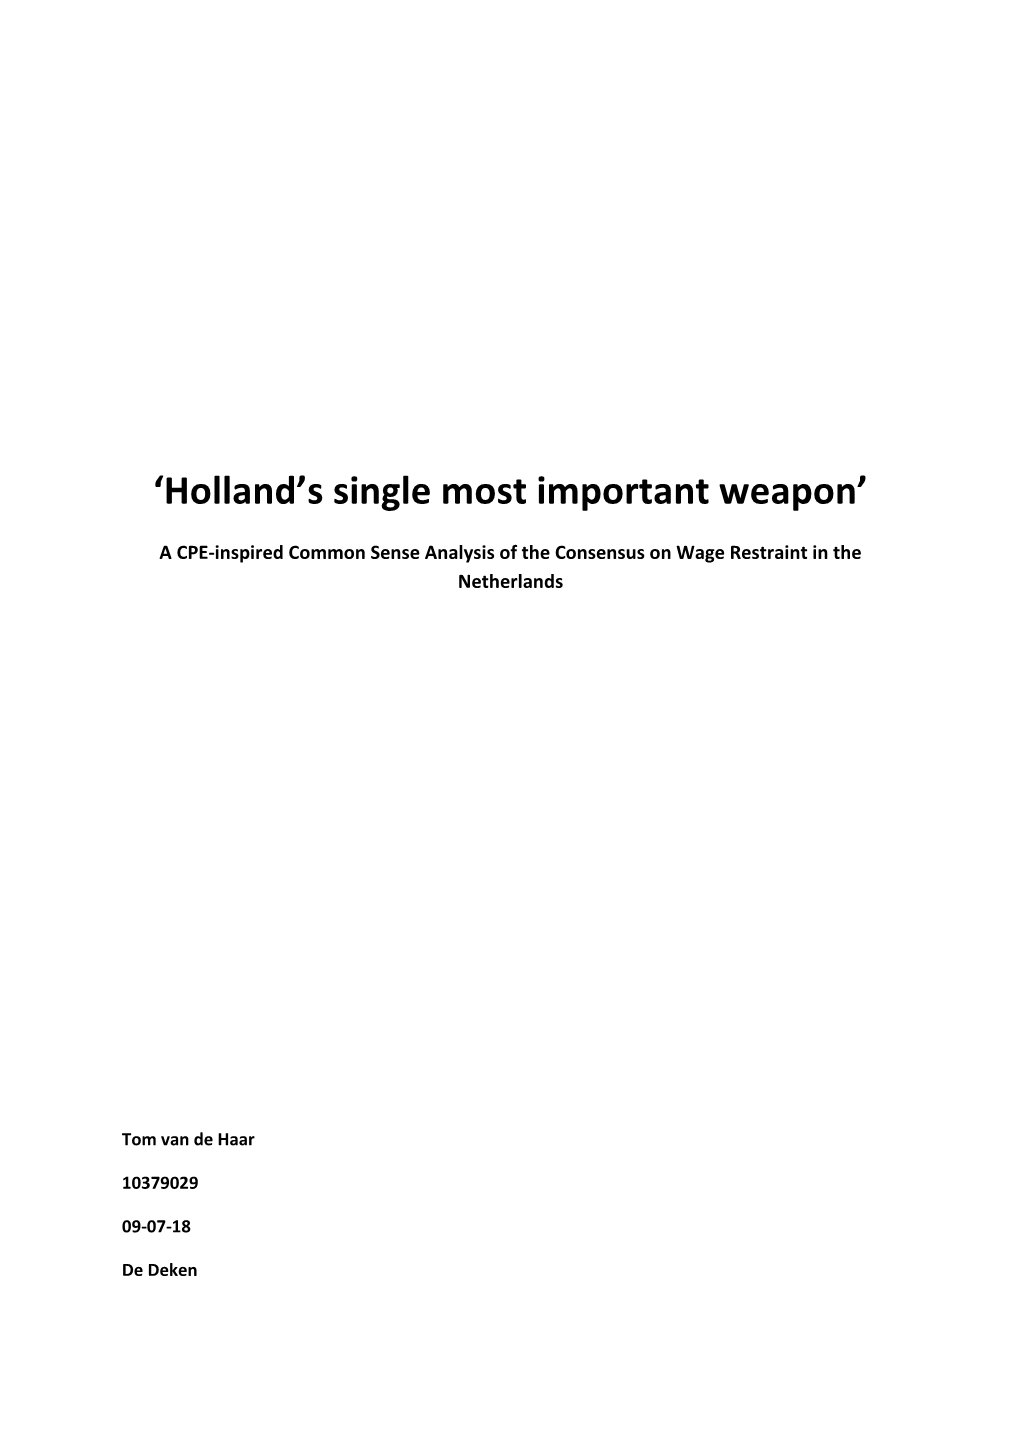 'Holland's Single Most Important Weapon'